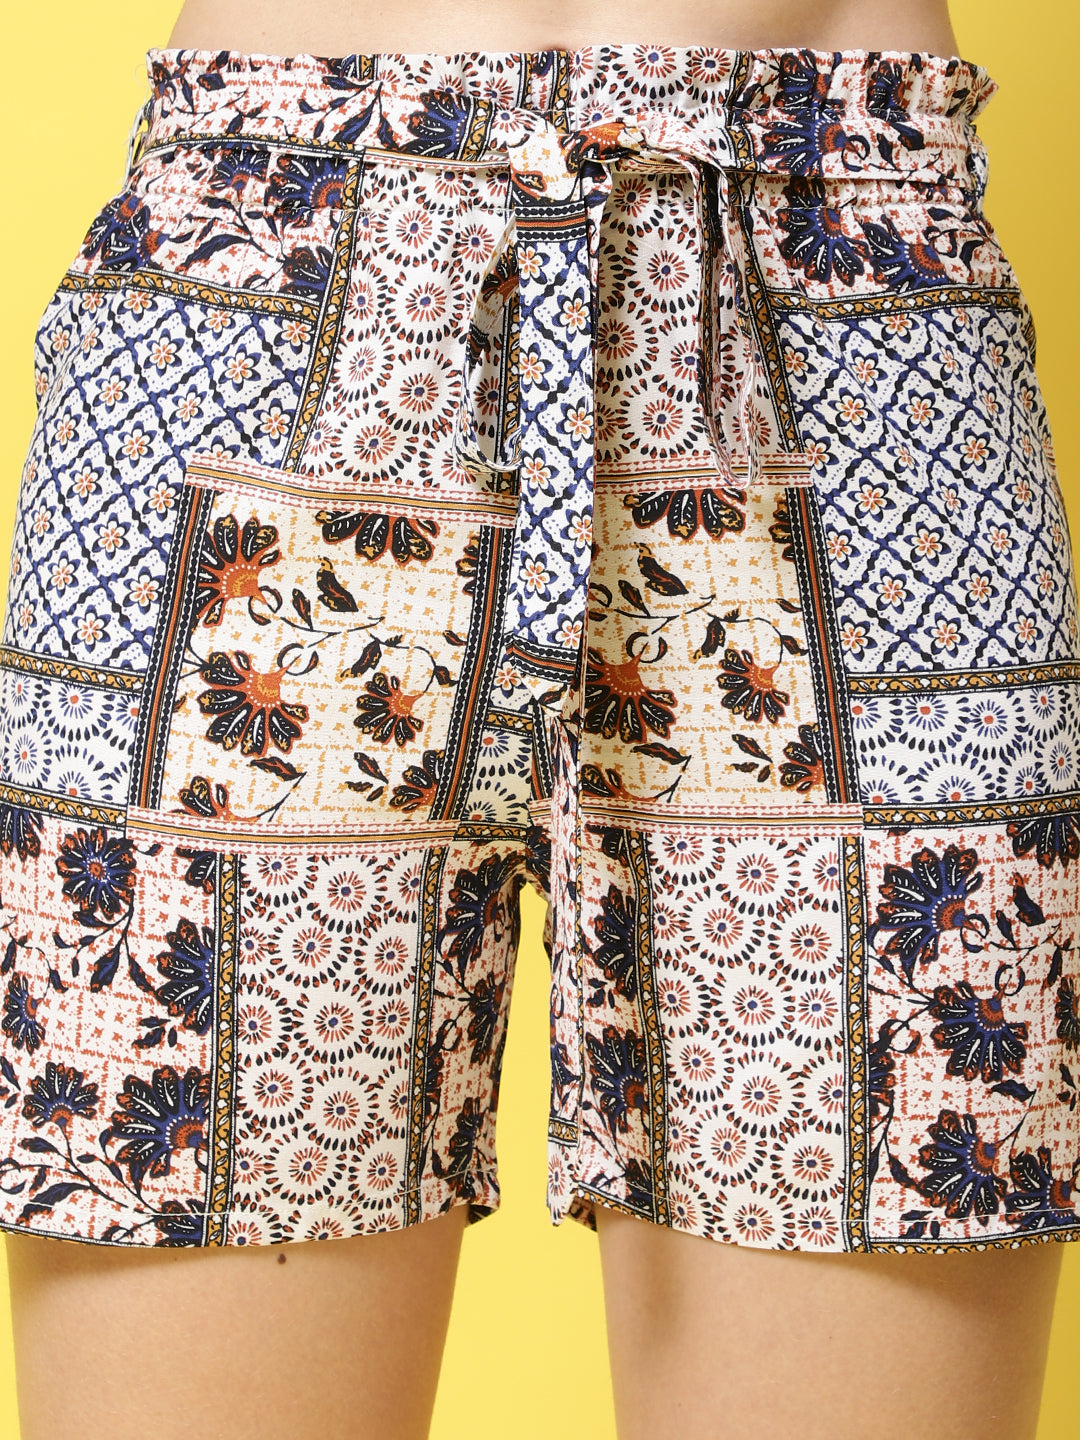 Blue Color Abstract Printed Viscose Rayon Shorts For Women Claura Designs Pvt. Ltd. Lounge Shorts blue, Lounge Short, Loungeshort_size, Rayon, Shorts, Women